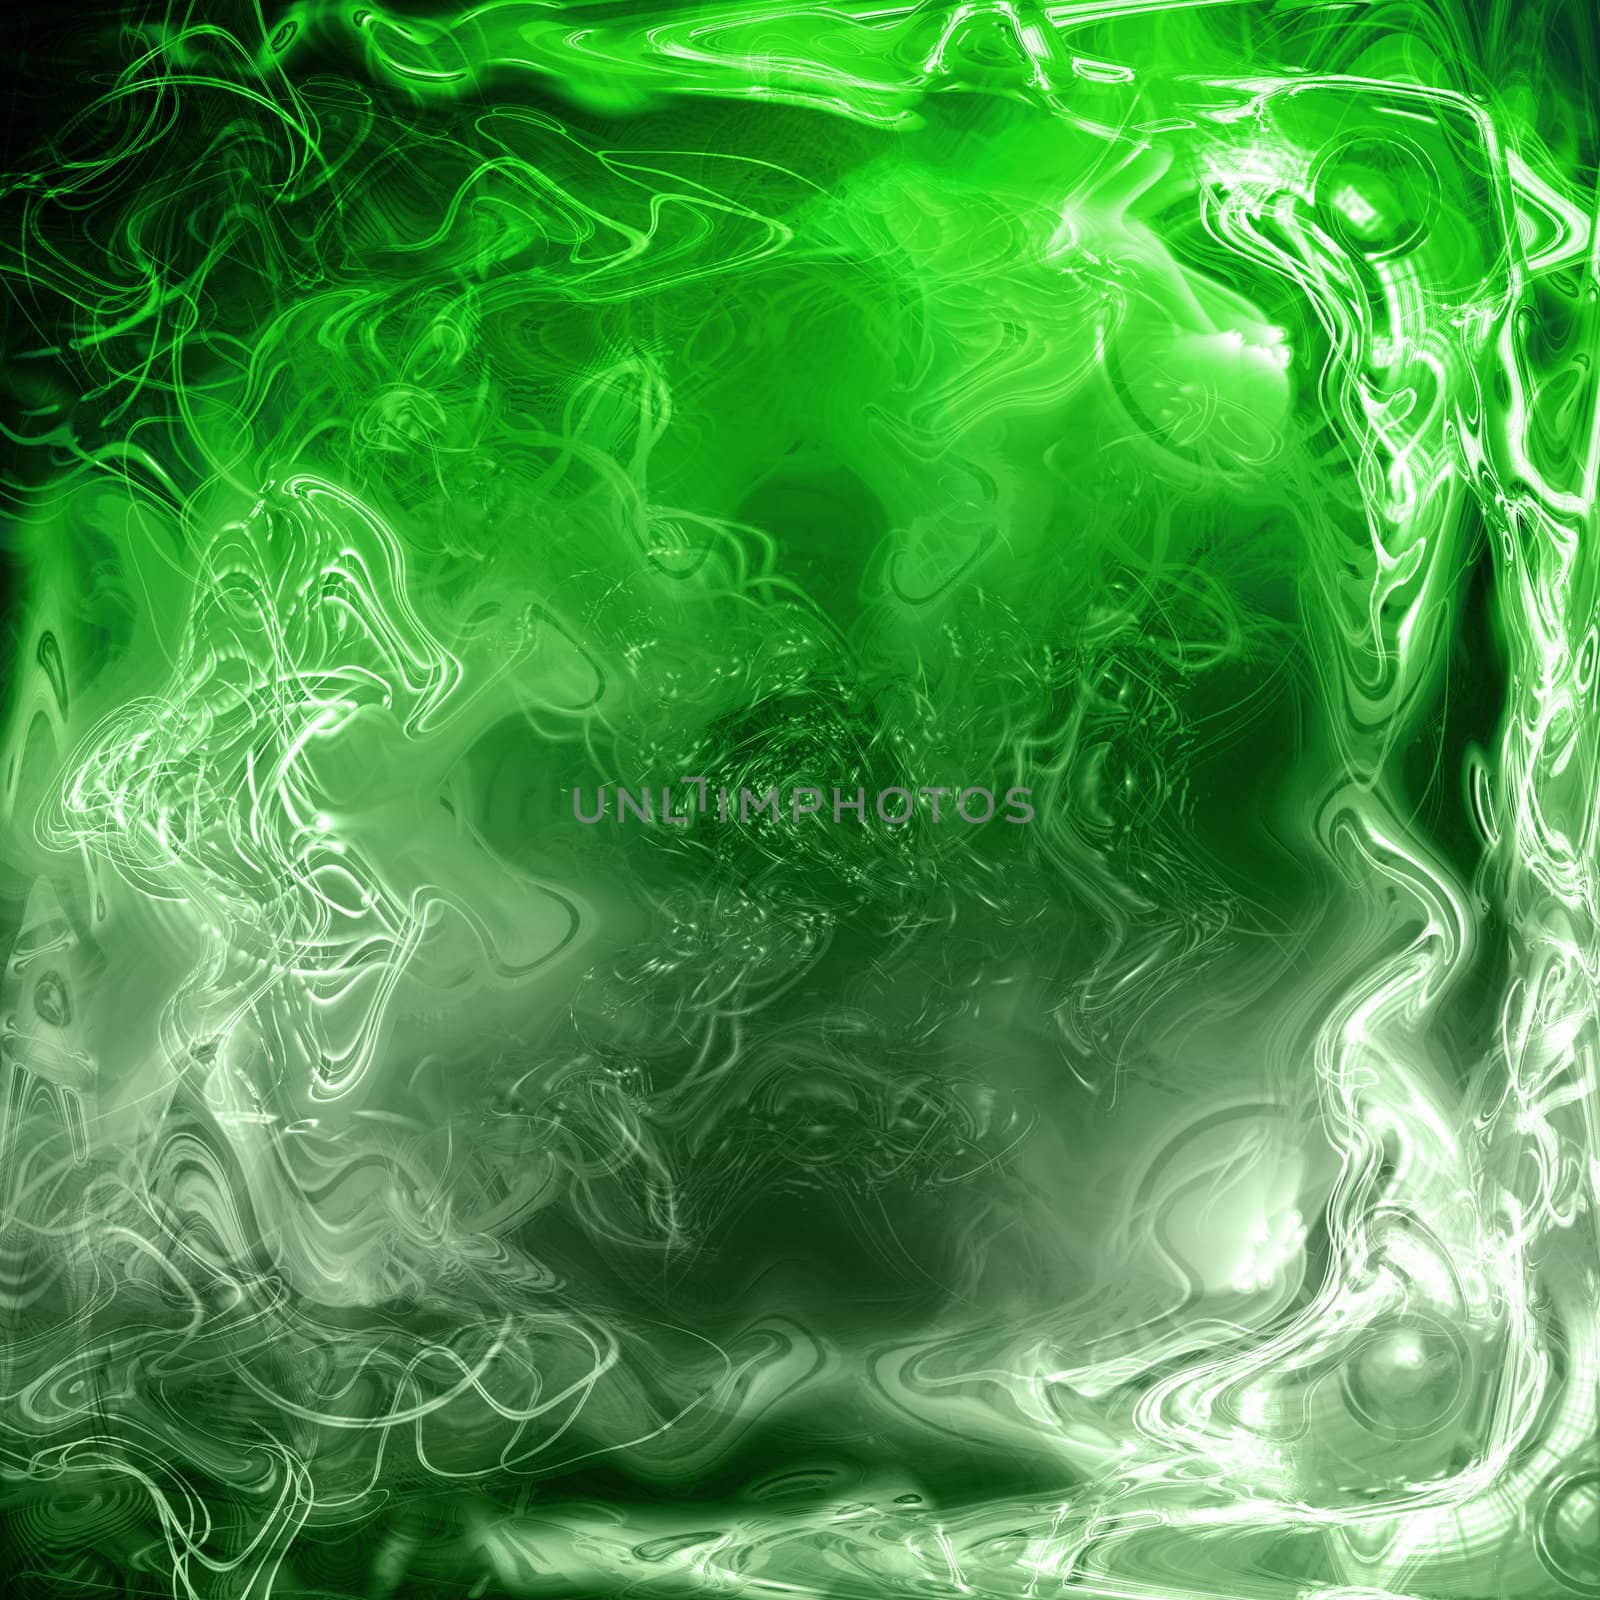 A cool 3d background -a green, fluid abstract background. 